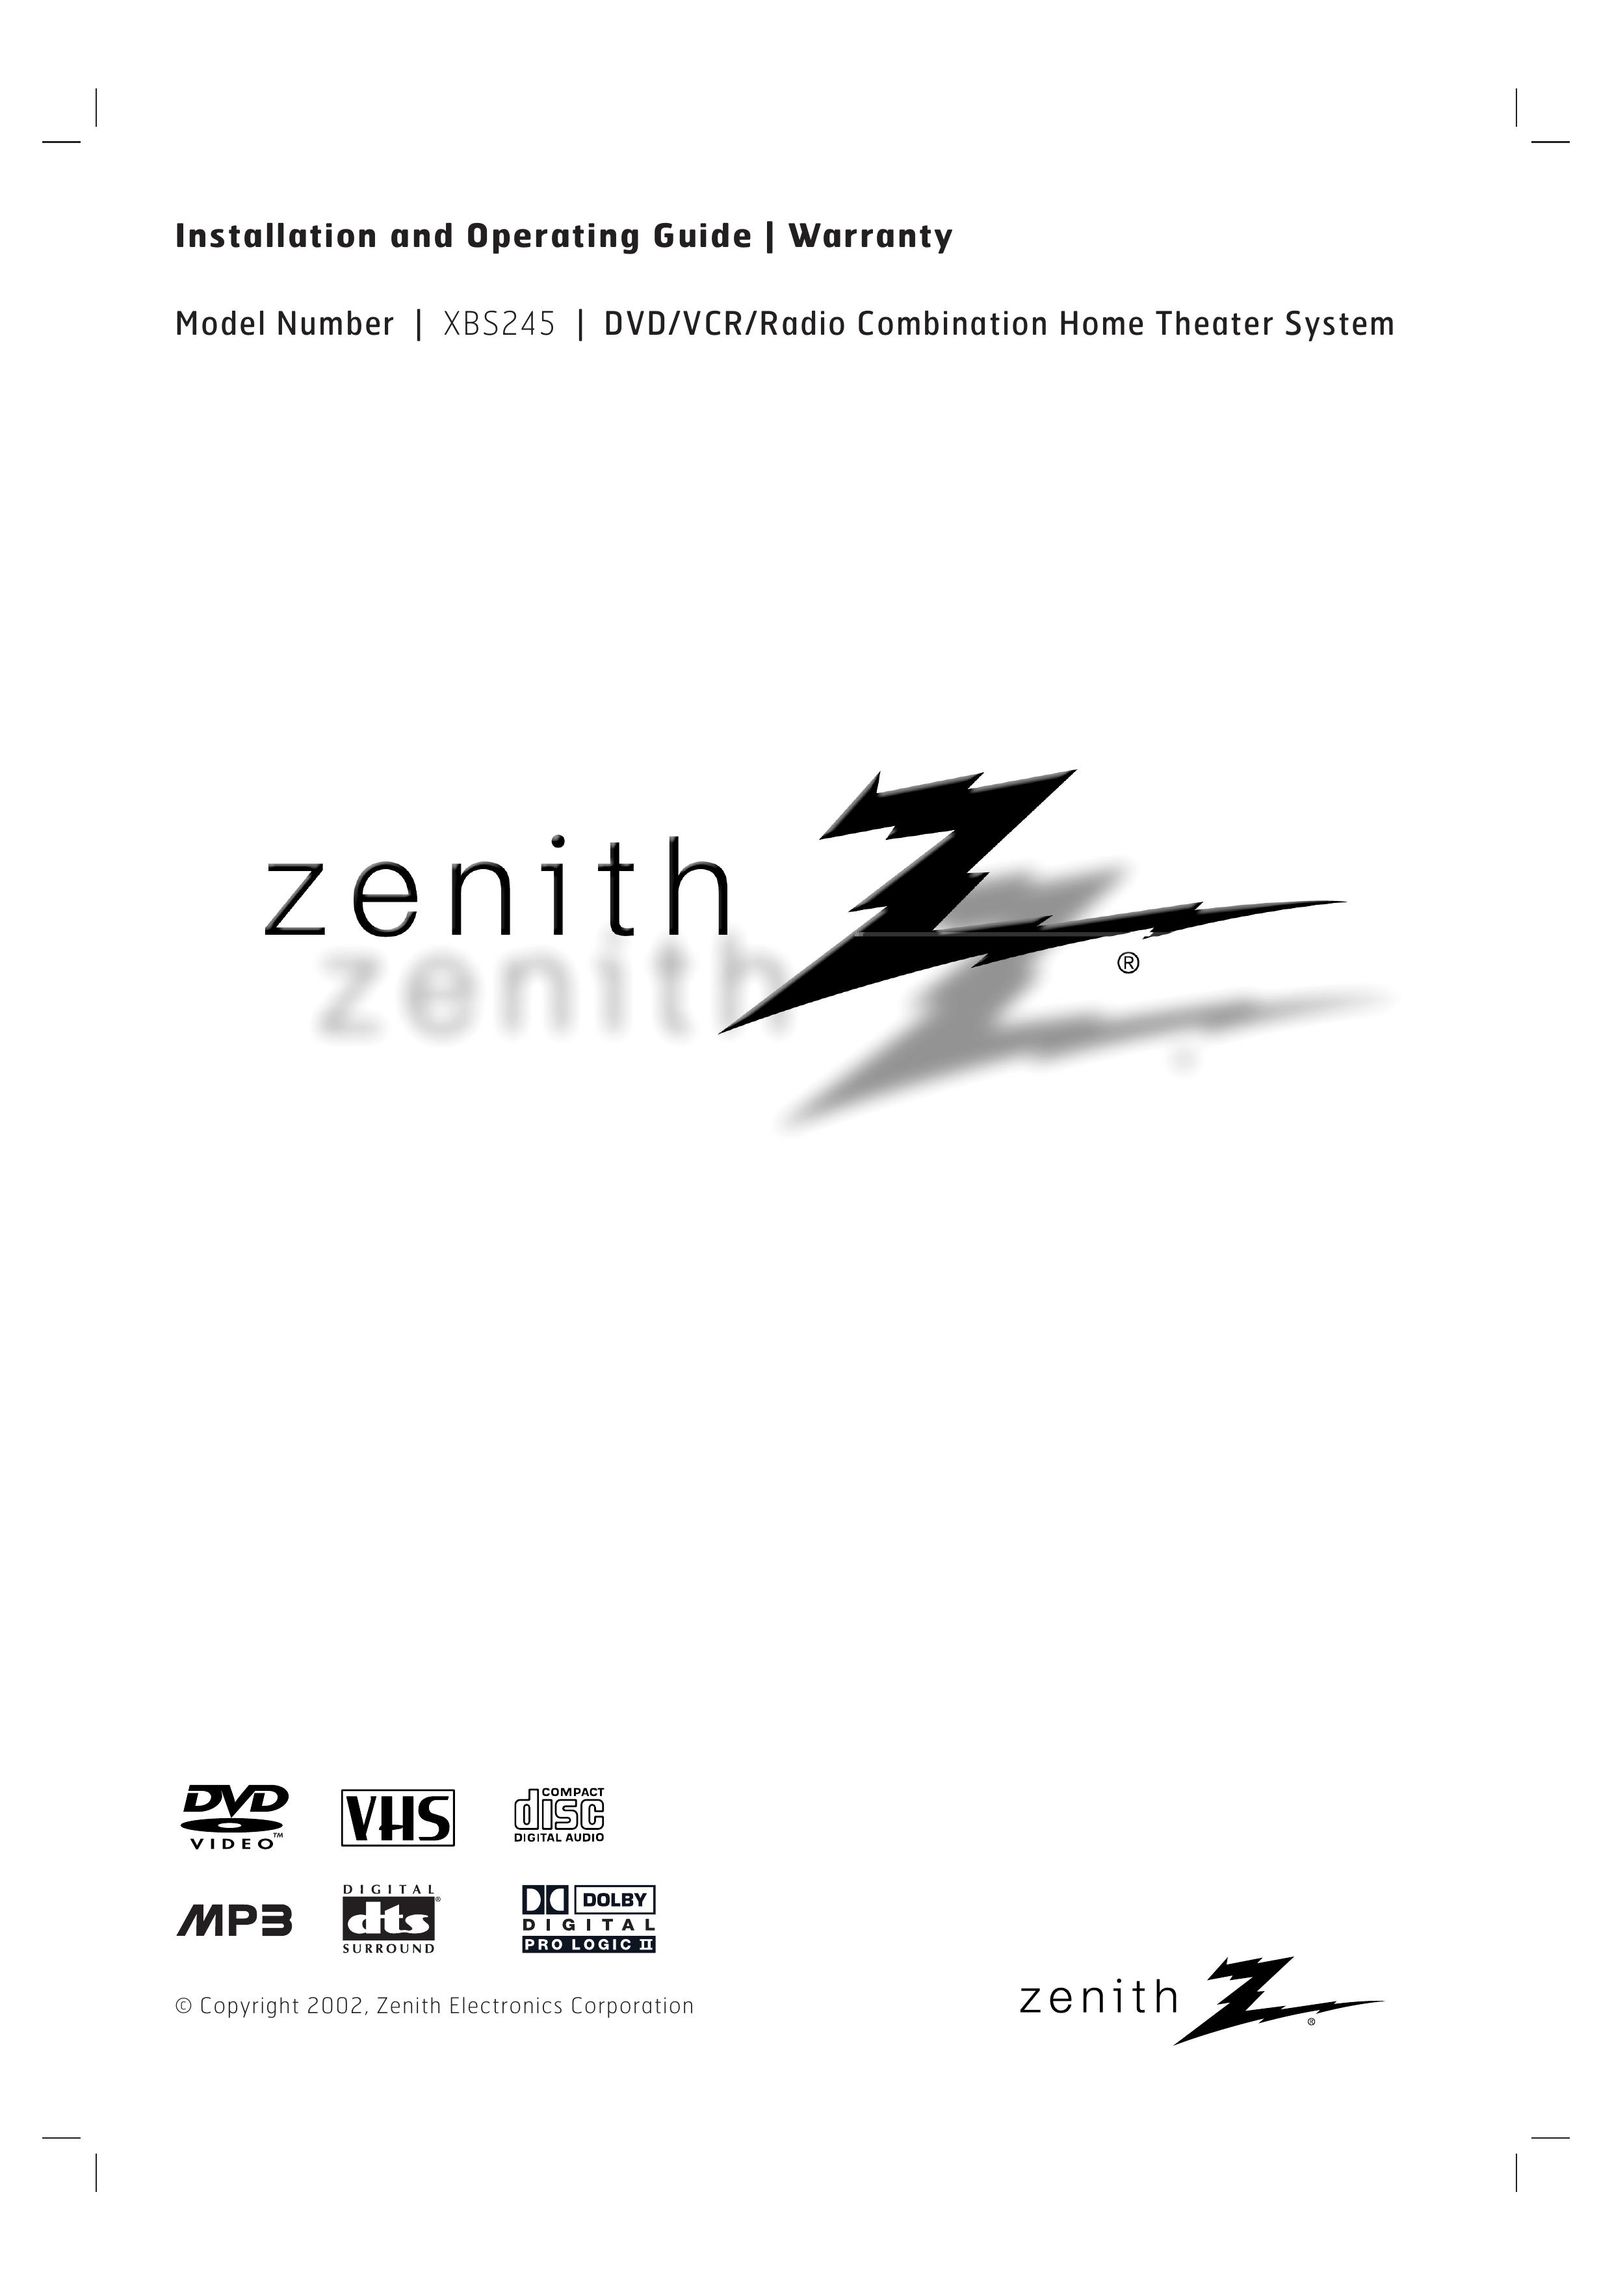 Zenith XBS245 Home Theater System User Manual